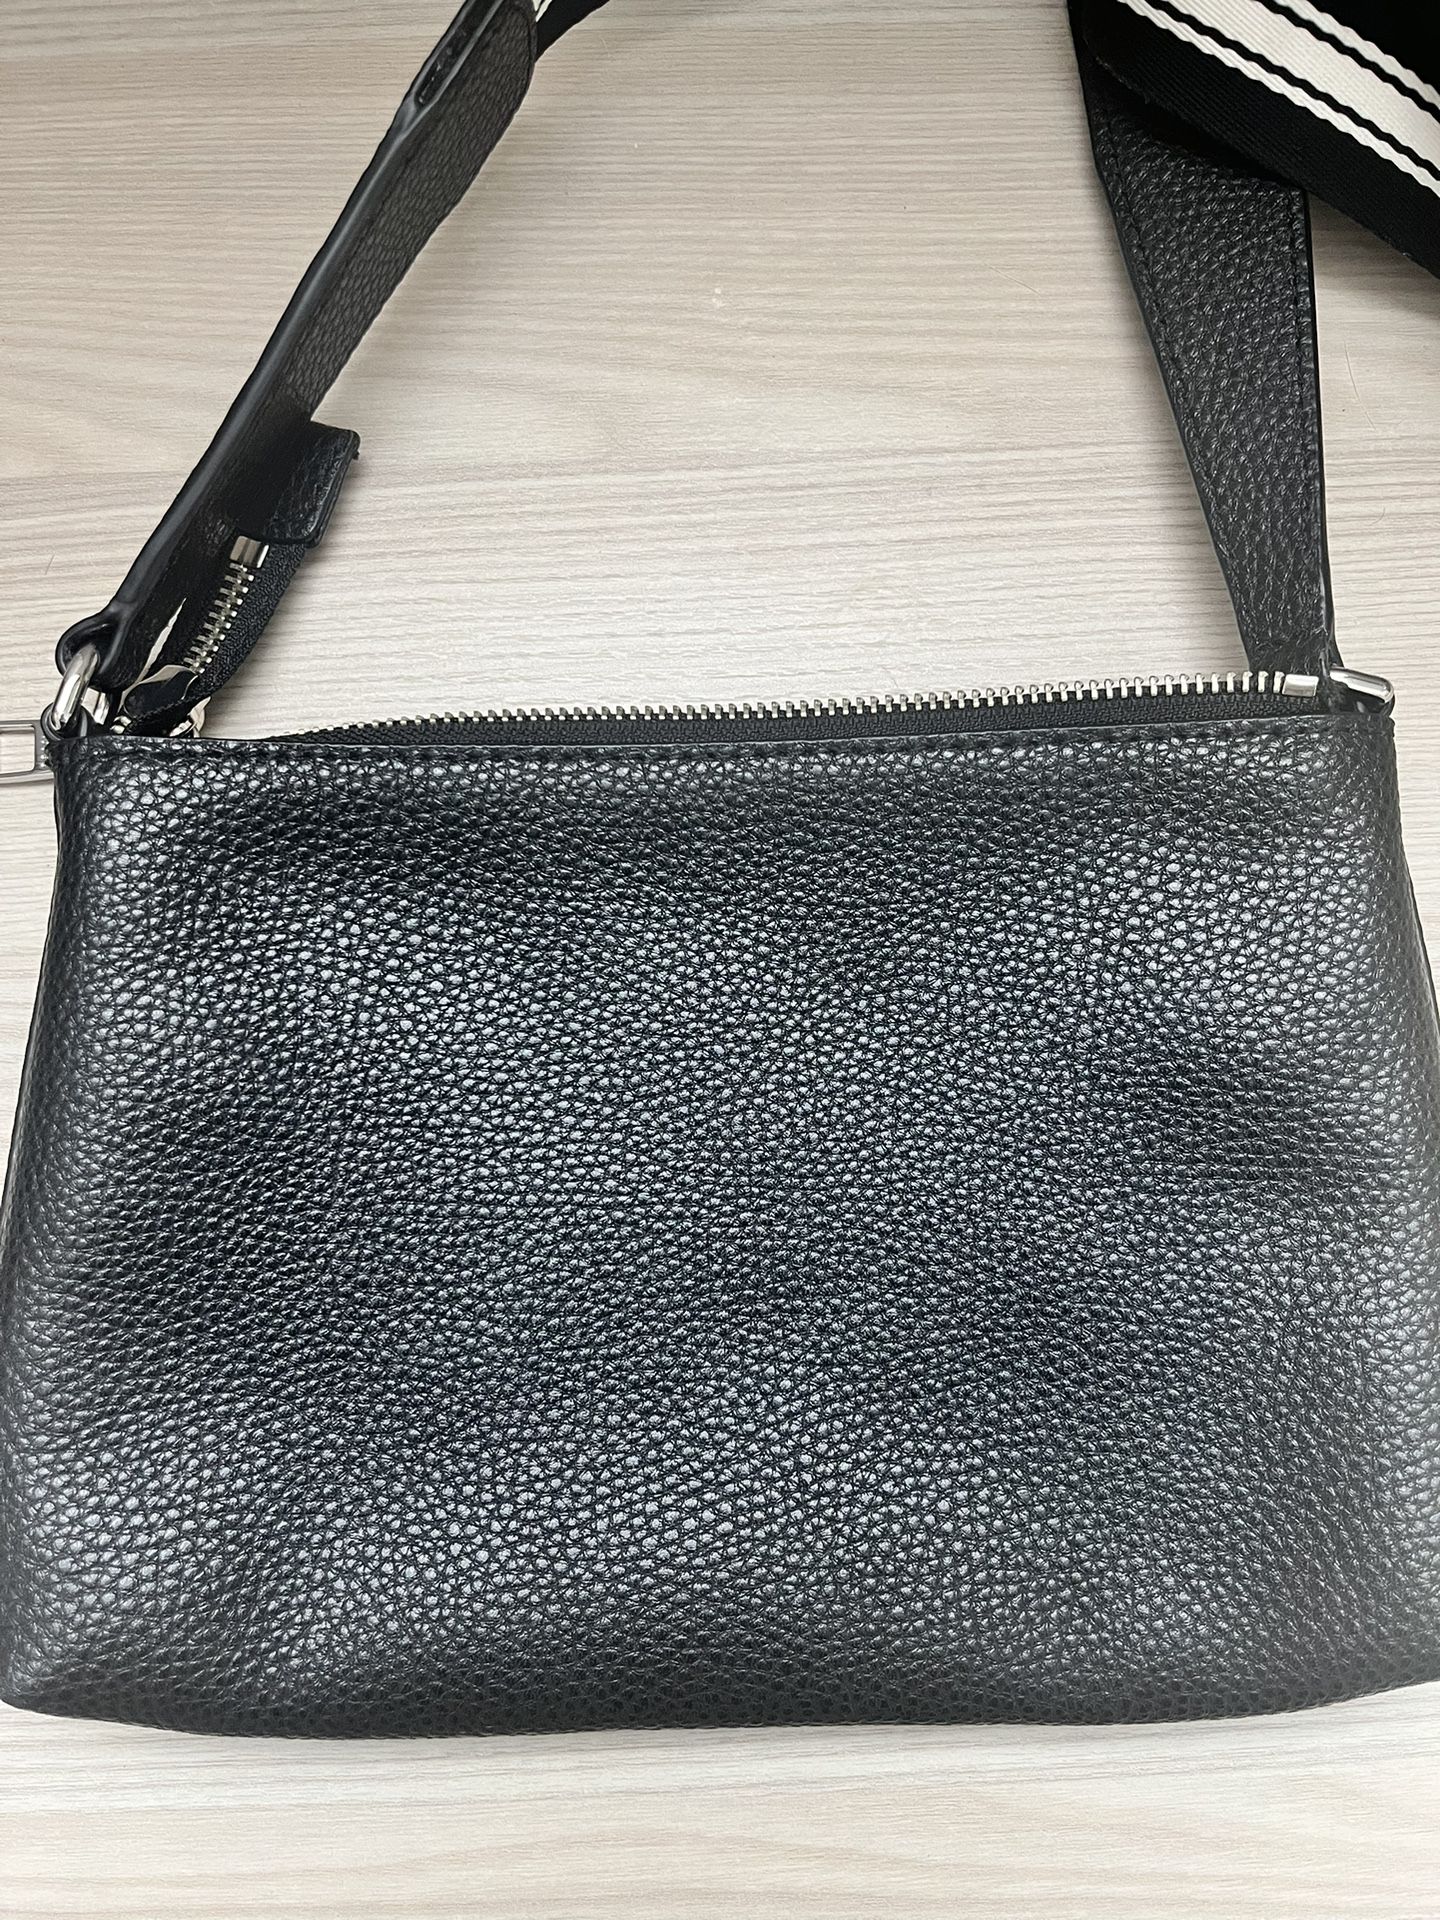 Marc Jacobs Black Leather Crossbody Bag for Sale in Santa Ana, CA - OfferUp